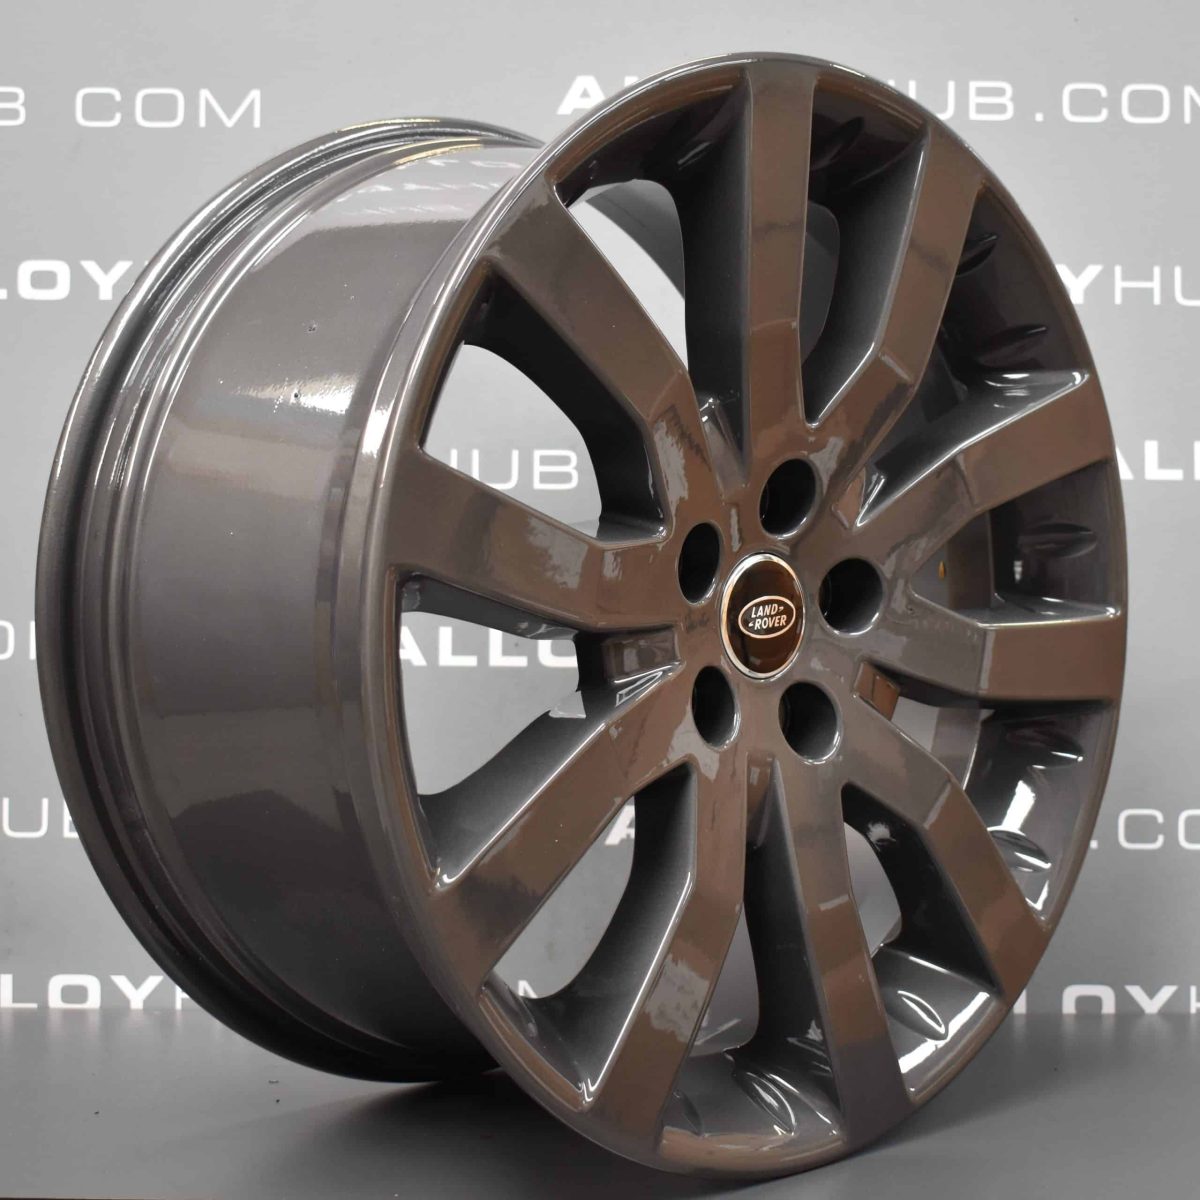 Genuine Land Rover Range Rover Supercharged V Spoke 20" Inch Alloy Wheels with Anthracite Grey Finish LR008742